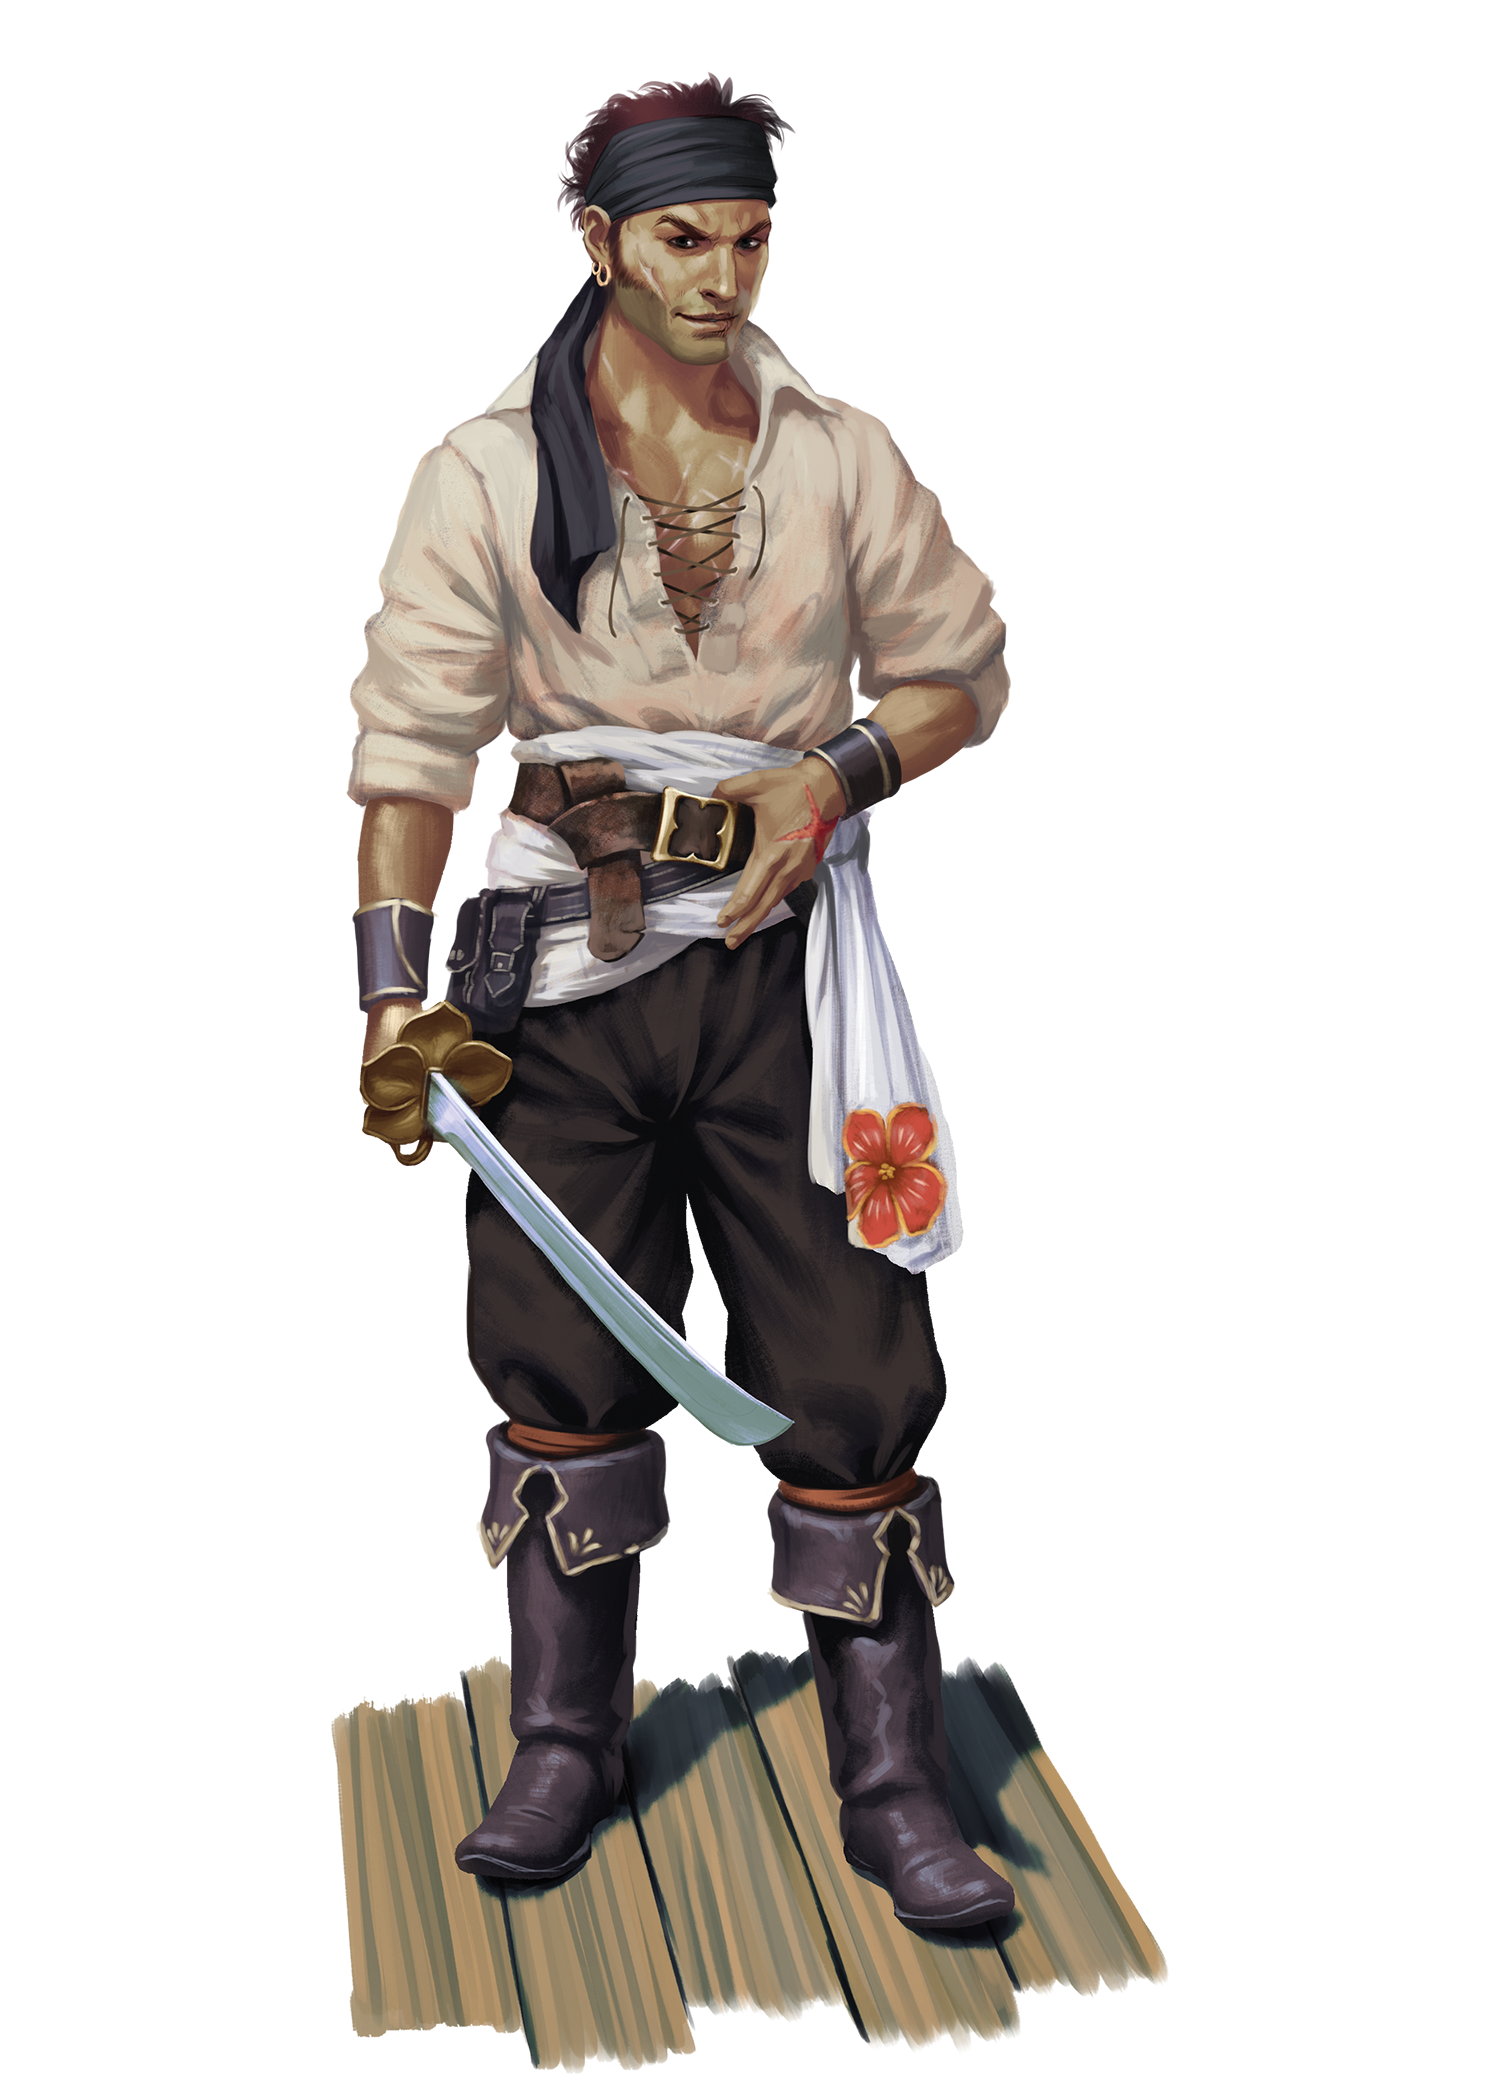 A man wearing a typical pirate or swashbuckler’s outfit. He looks battle-worn with several scars and is wielding a scimitar with a flower motif for the hilt.